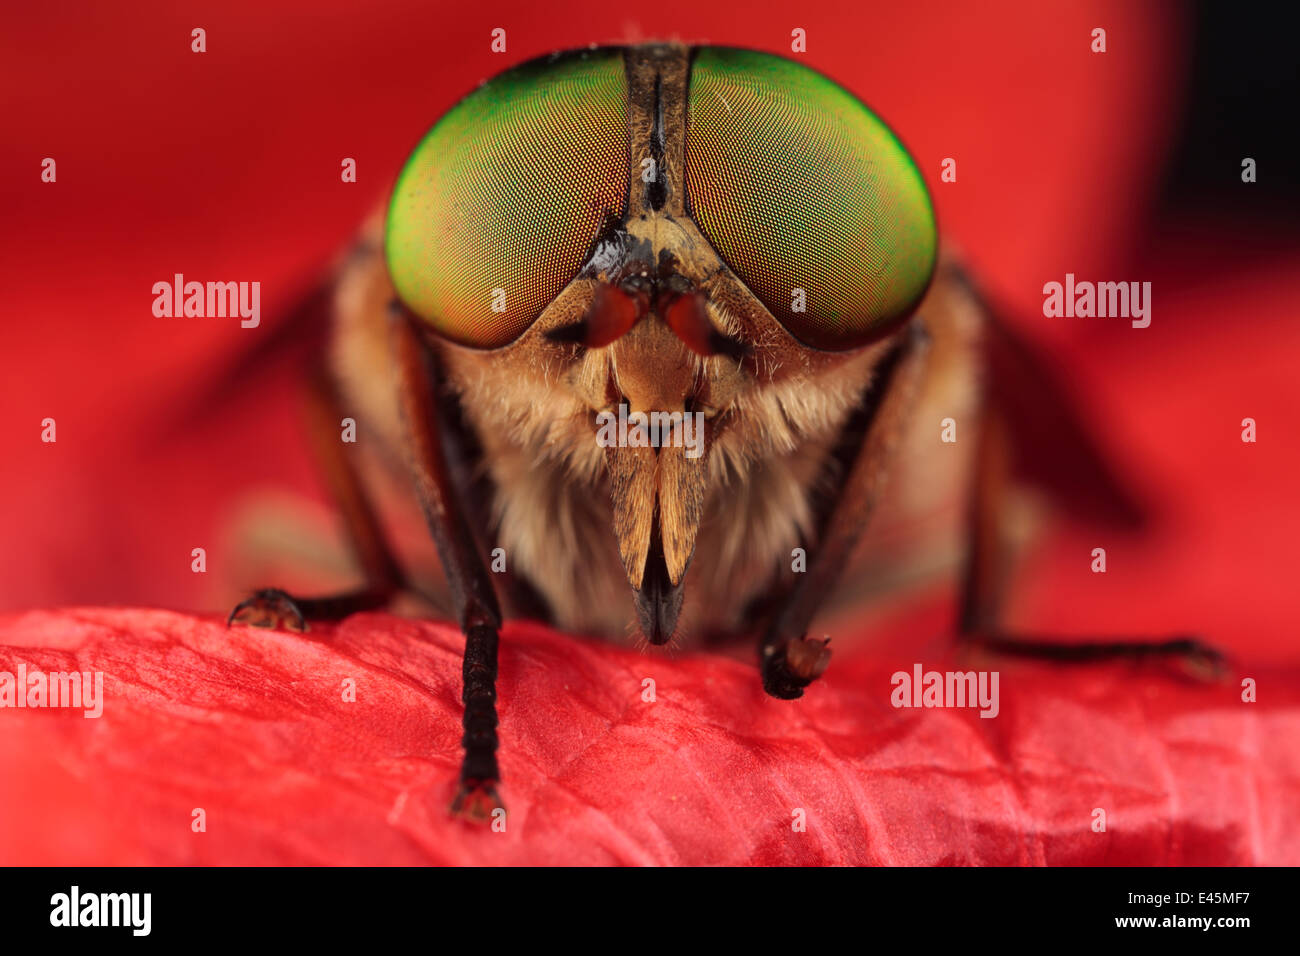 Horsefly (Tabanus sp) head portrait, Stenje region, Galicica National Park, Macedonia, June 2009. WWE OUTDOOR EXHIBITION. NOT AVAILABLE FOR GREETING CARDS OR CALENDARS Wild Wonders kids book. Stock Photo